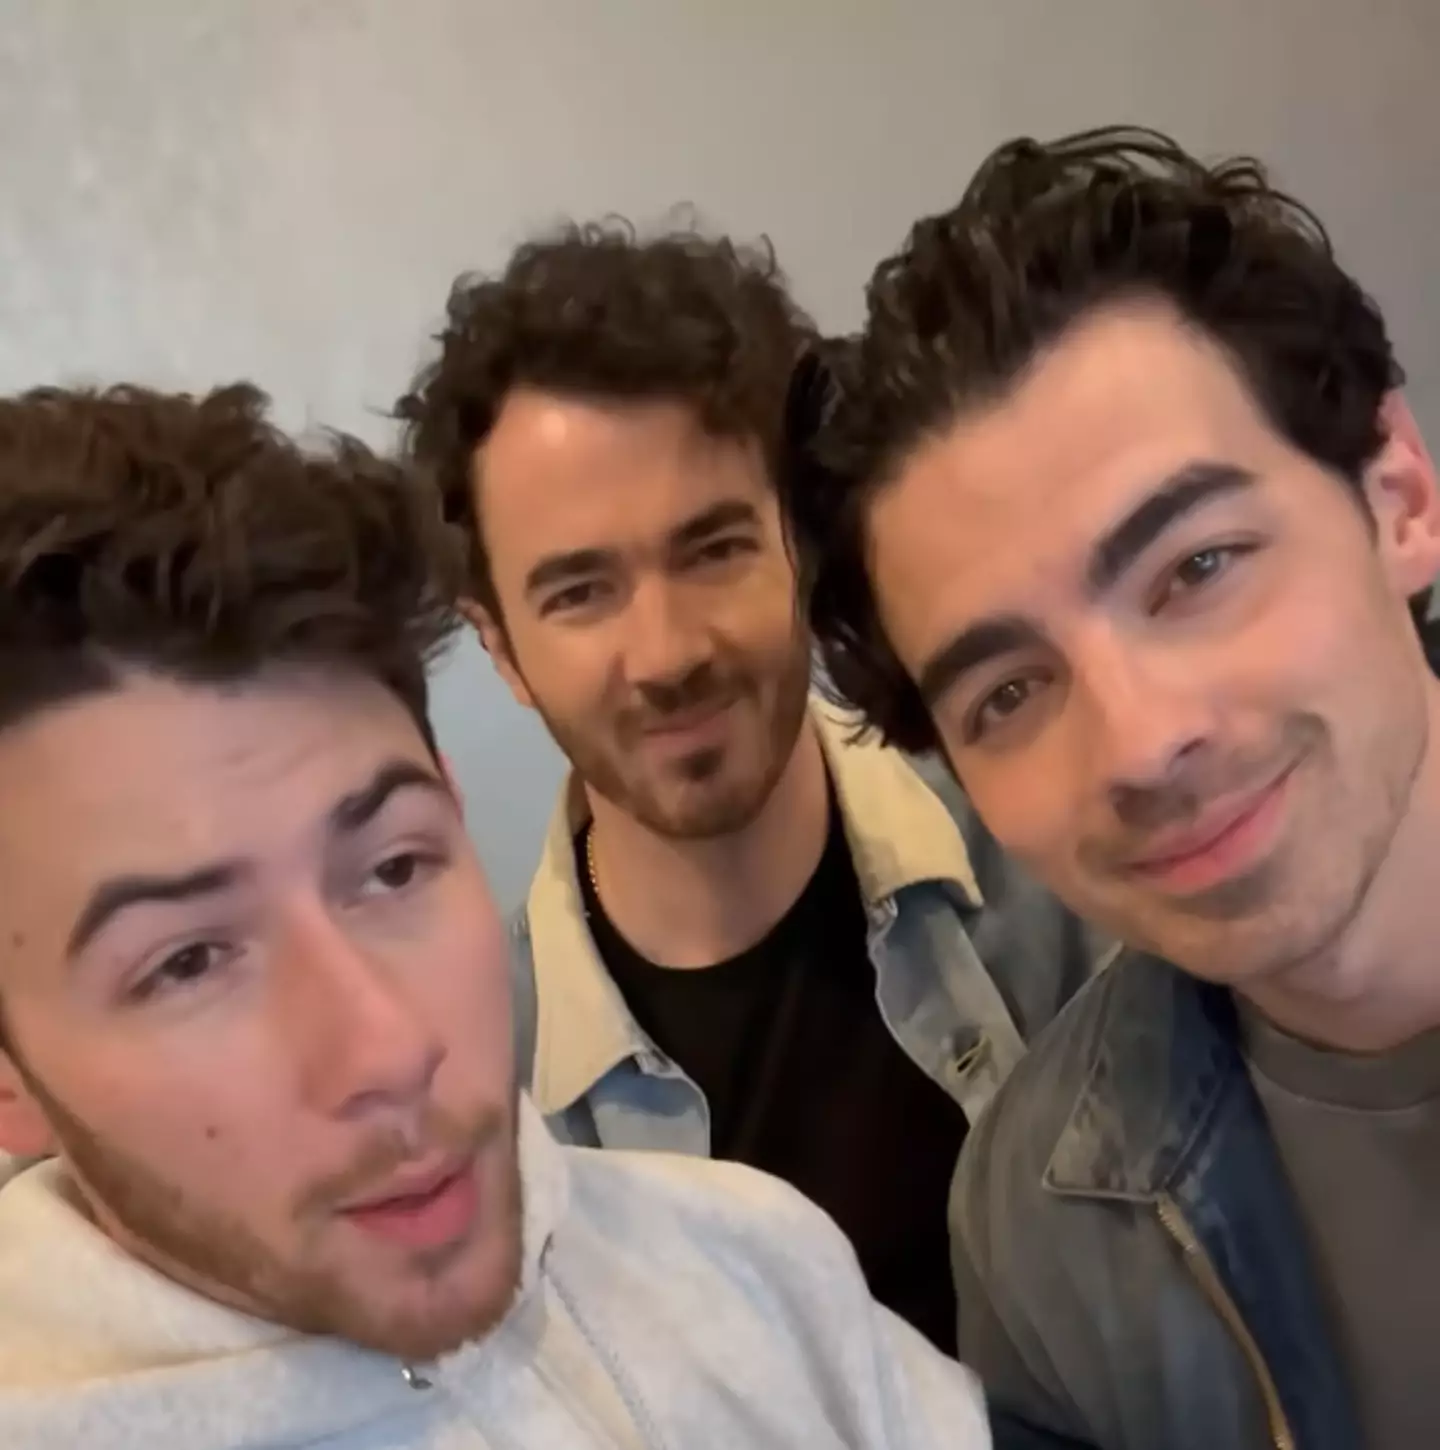 The Jonas Brothers started releasing music in 2006.